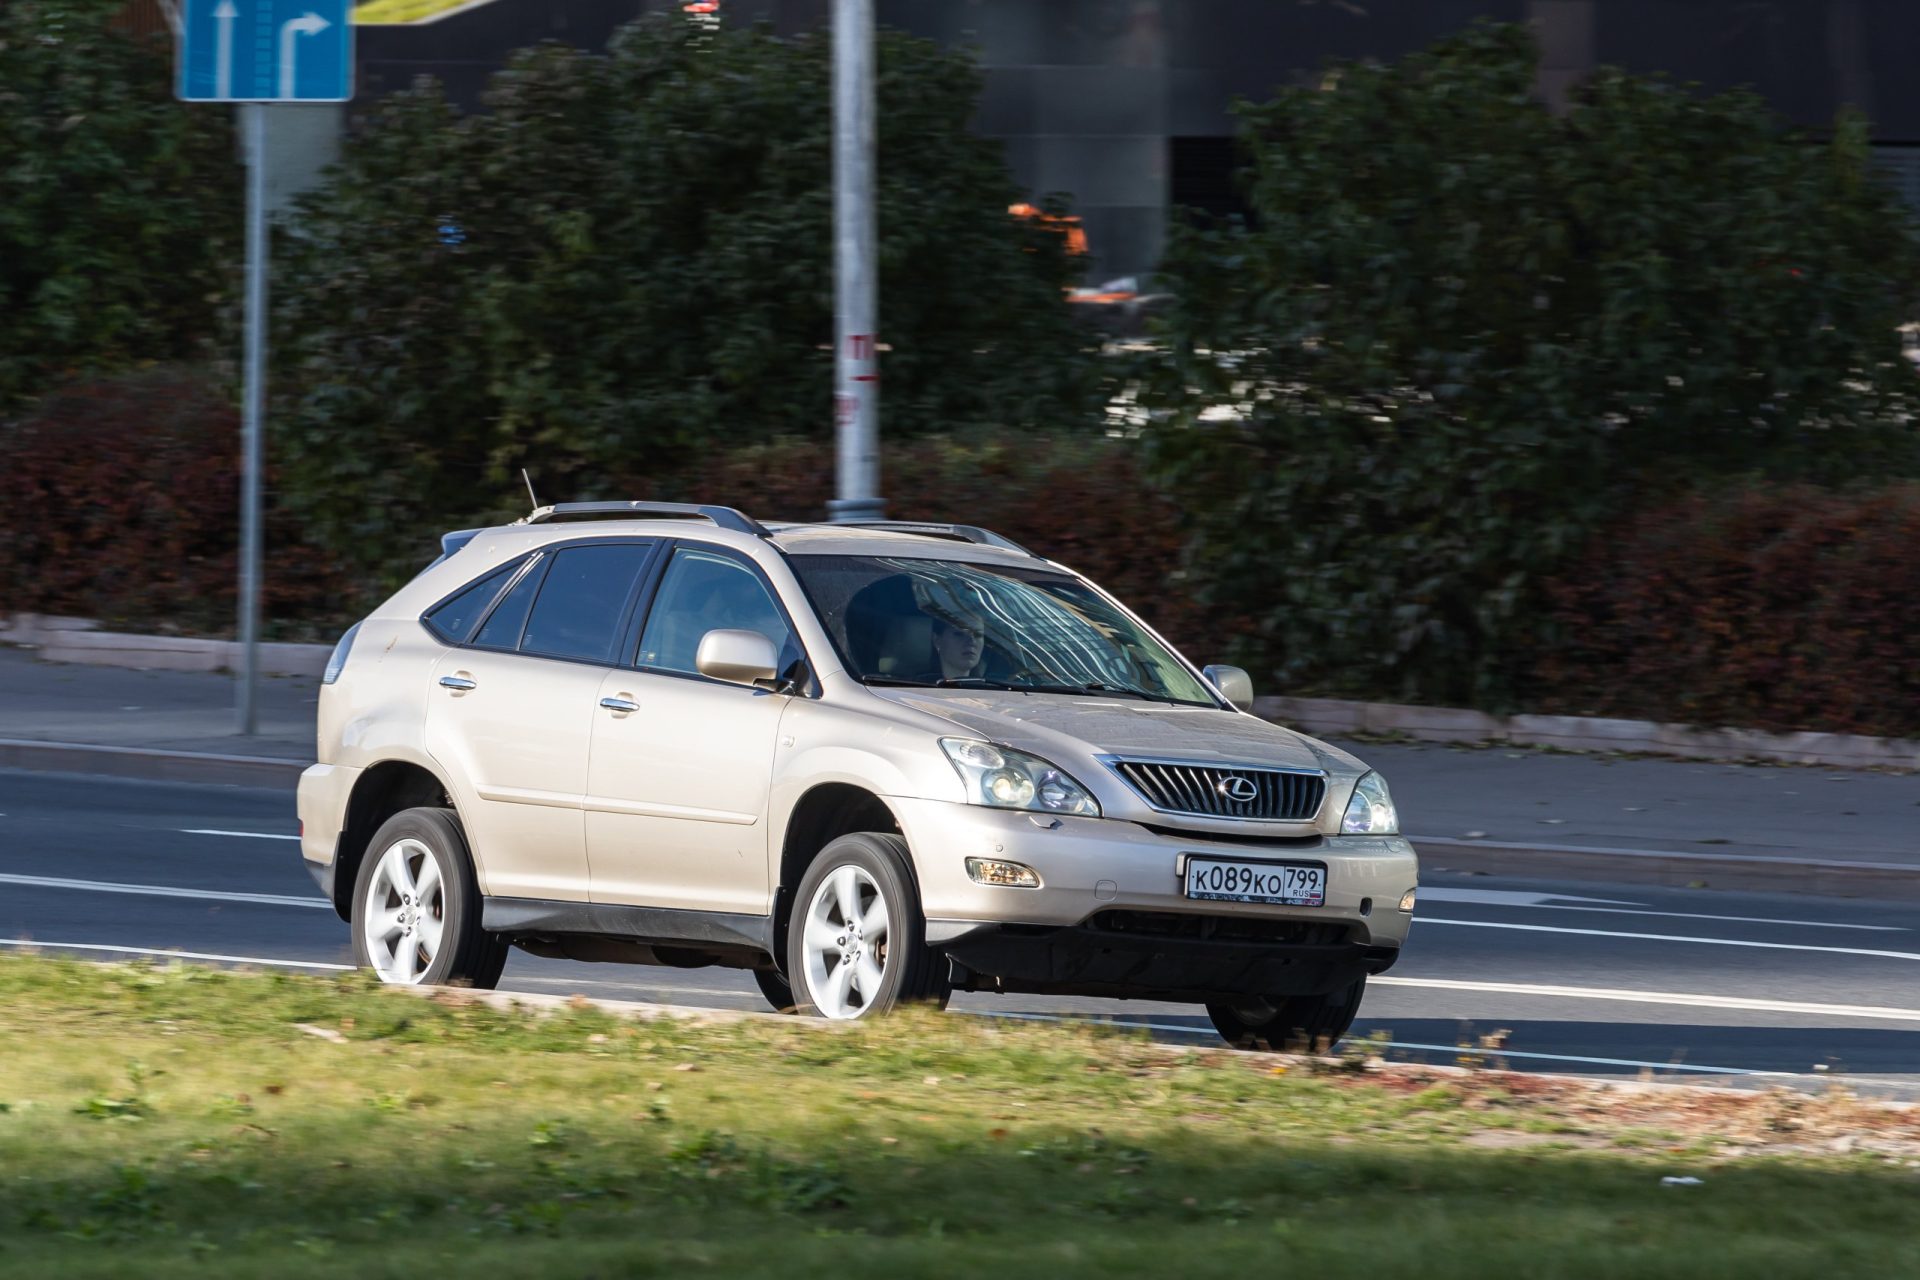 beige 2003 Lexus RX300 is driving fast on the street on a warm autumn day against the backdrop of a park